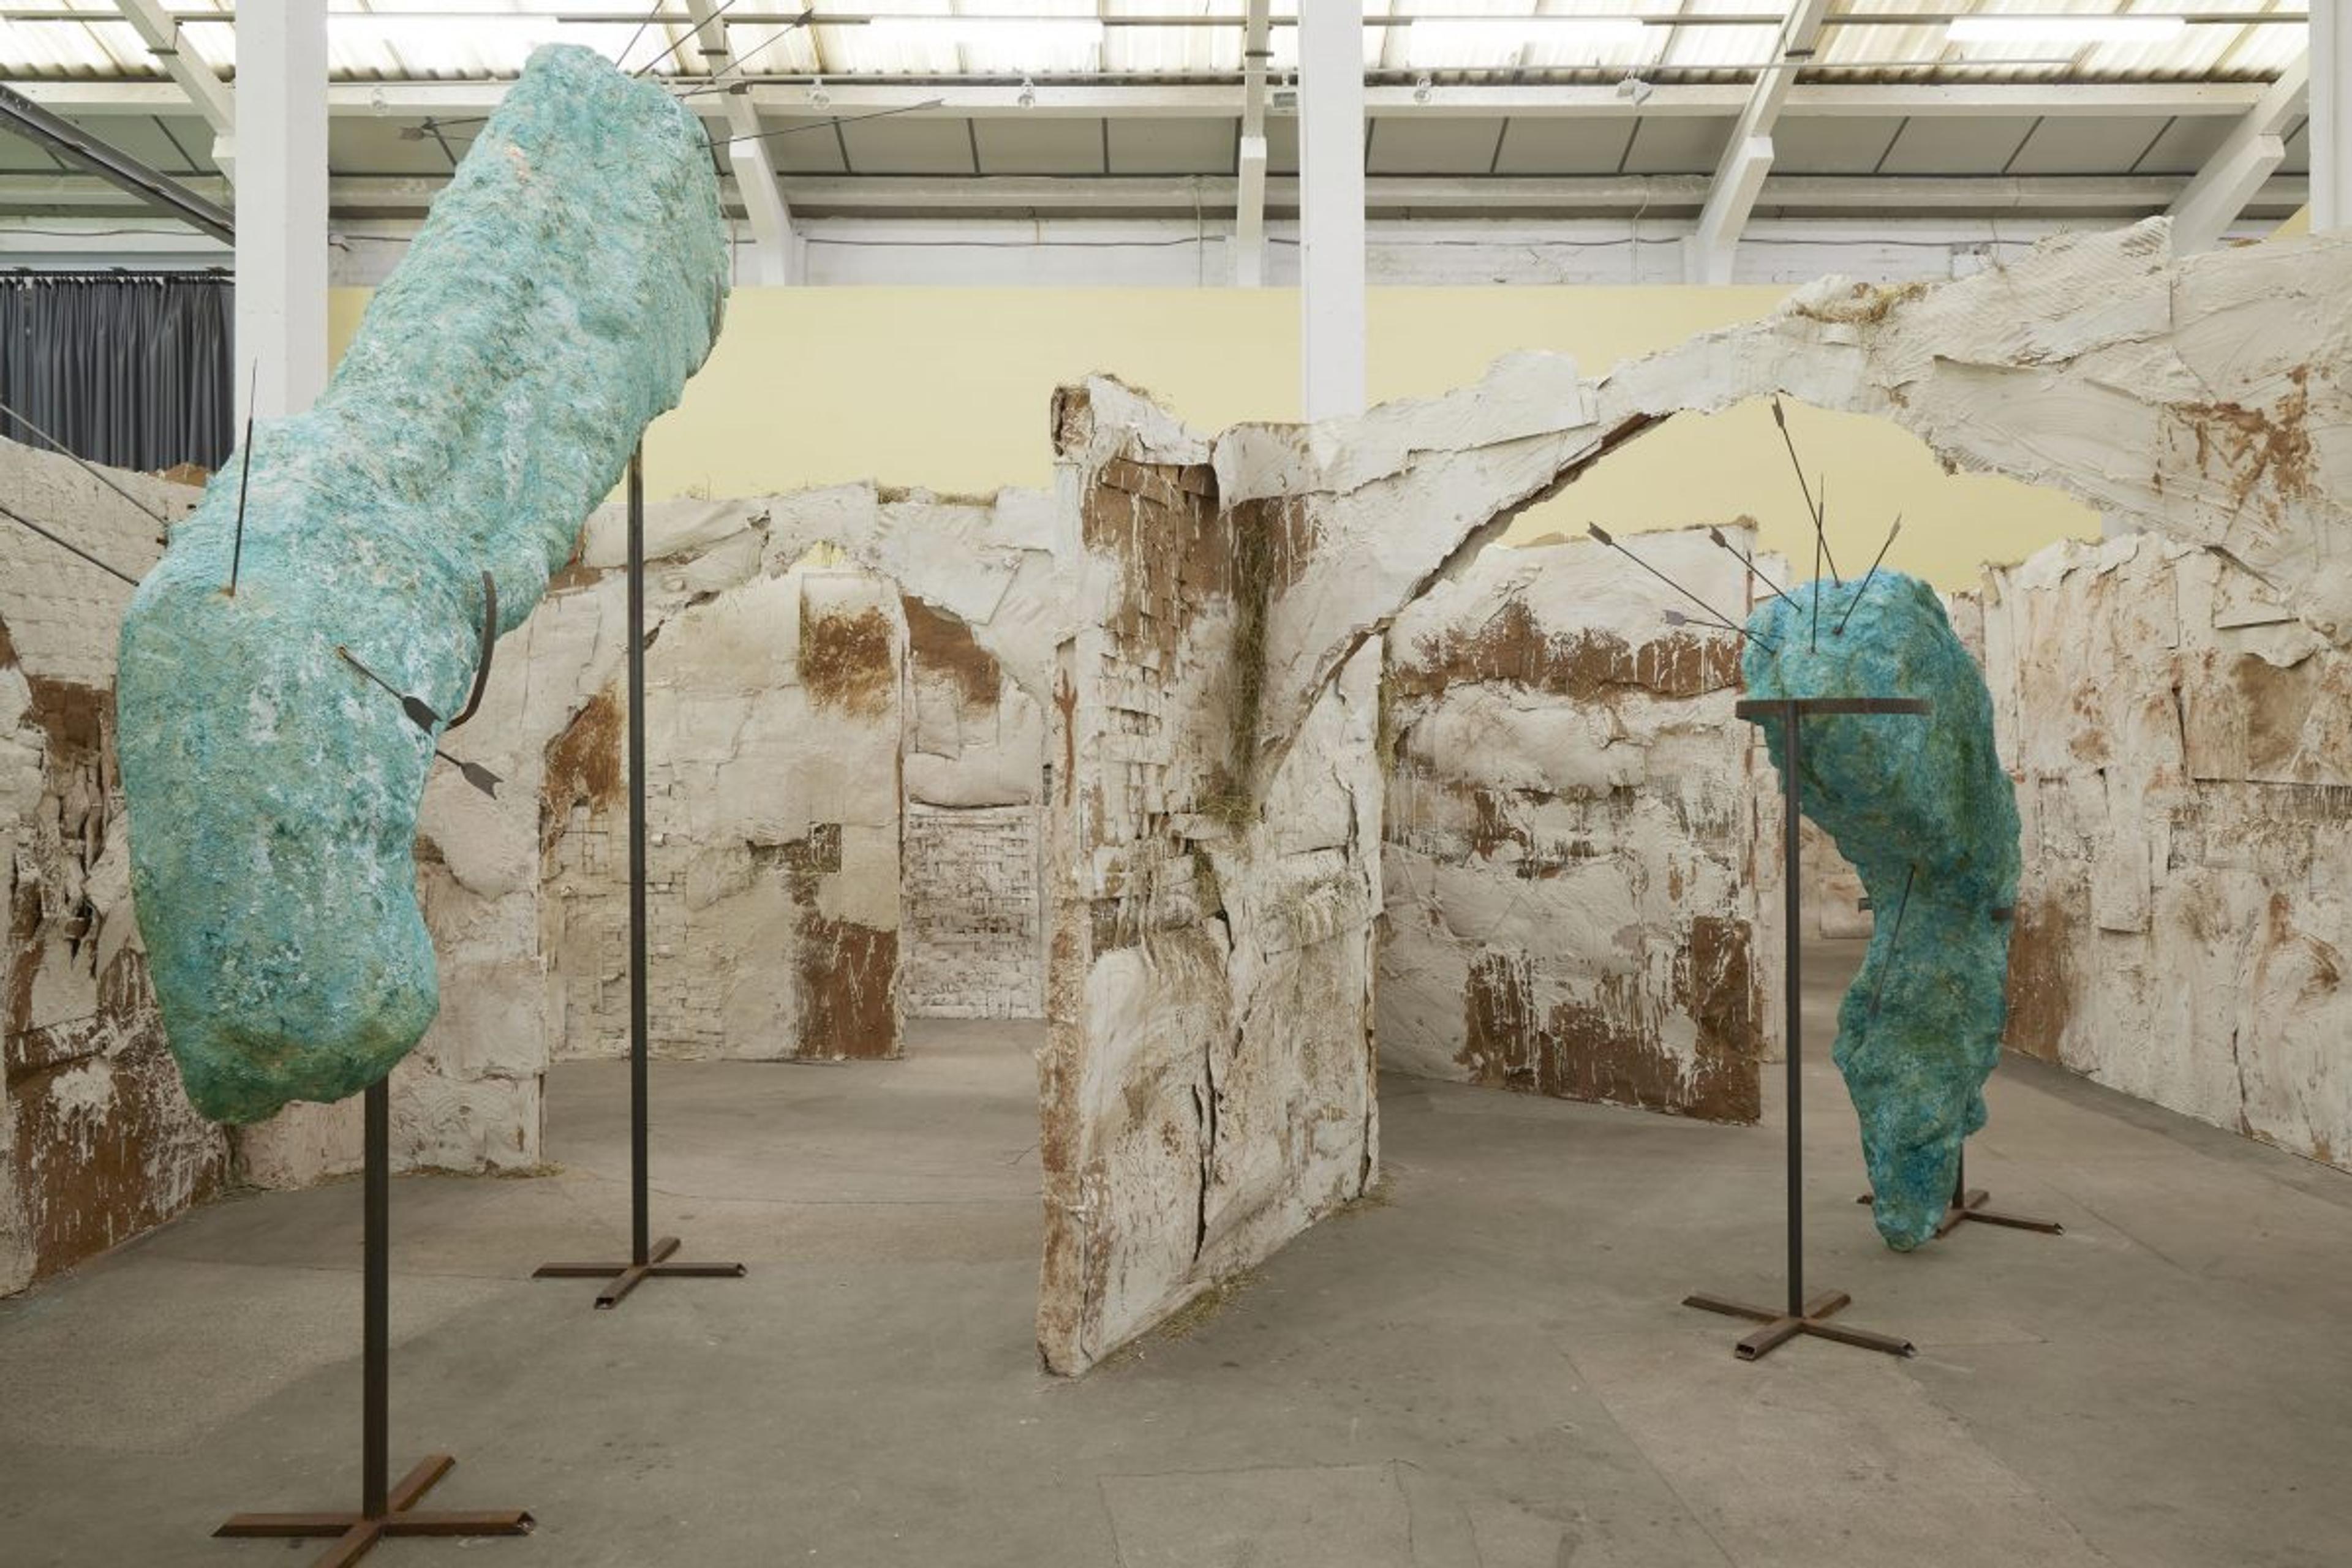 A view of Emii Alrai's large scale installation the Courtship of Giants. Two large turquoise sculptures coloured with copper oxide sit on large stands like large historical artefacts in museums. They are punctured with steel arrows. They sit inside a large maze made of layers of plaster, clay, straw and cardboard interspersed with woven elements.